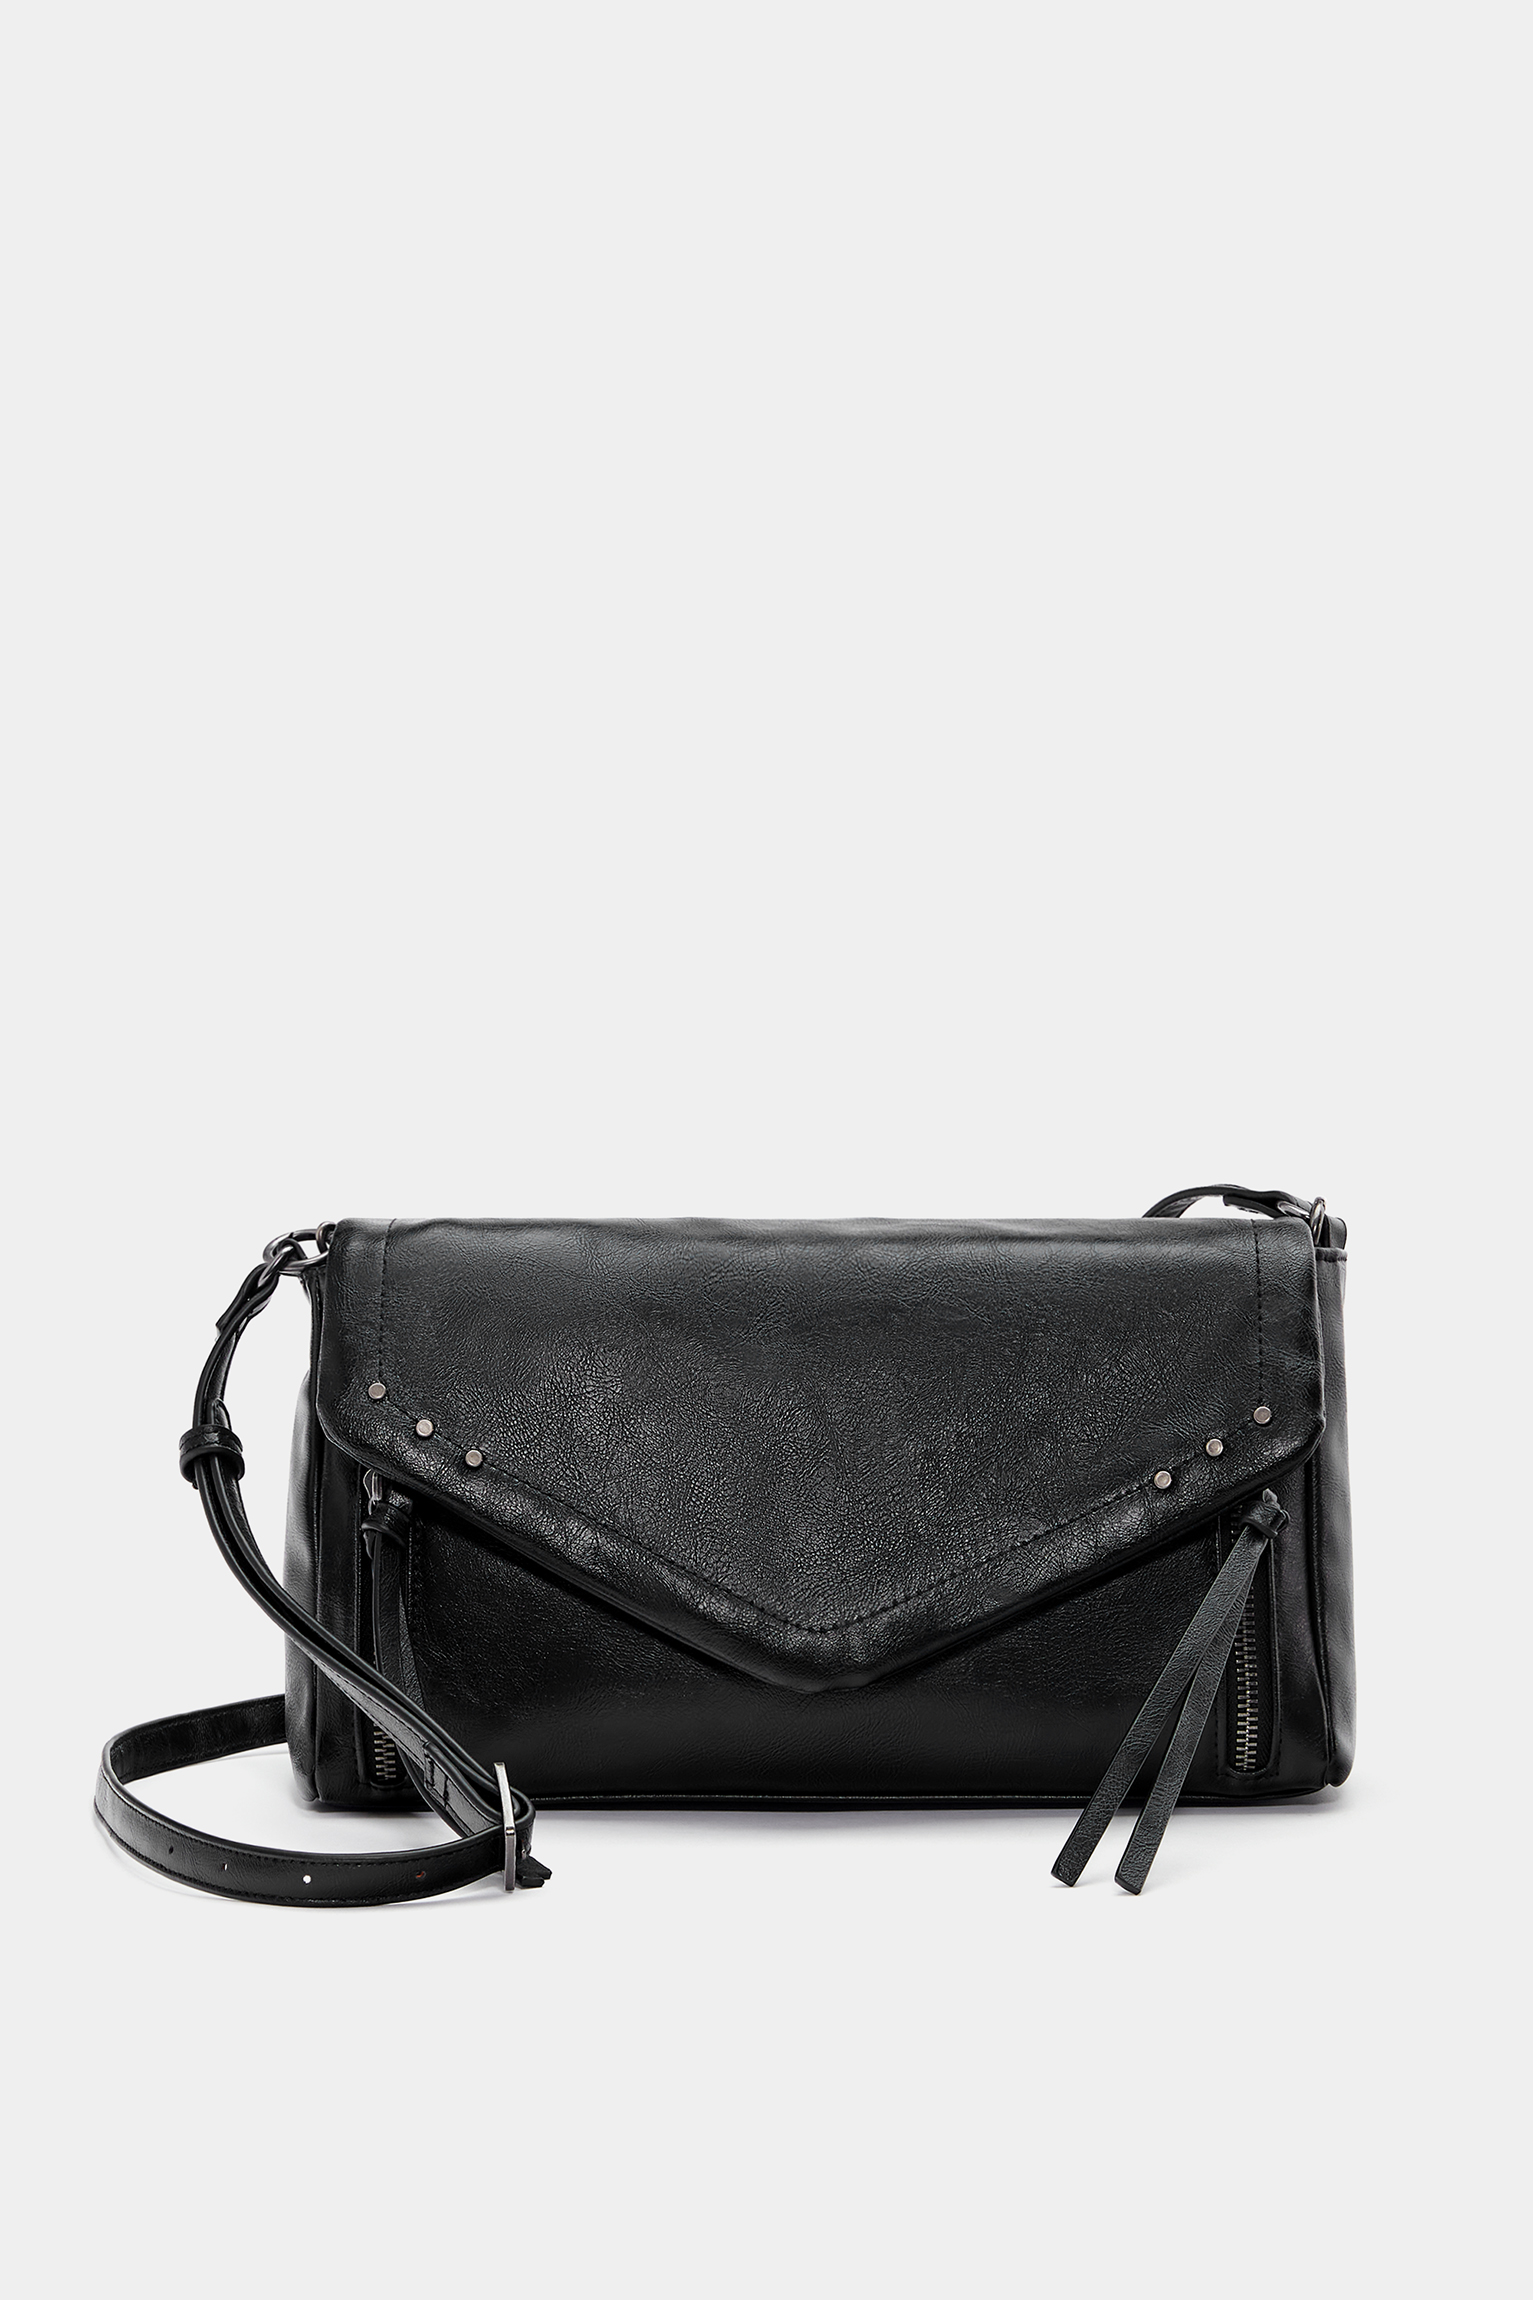 Messenger bag with flap and chain